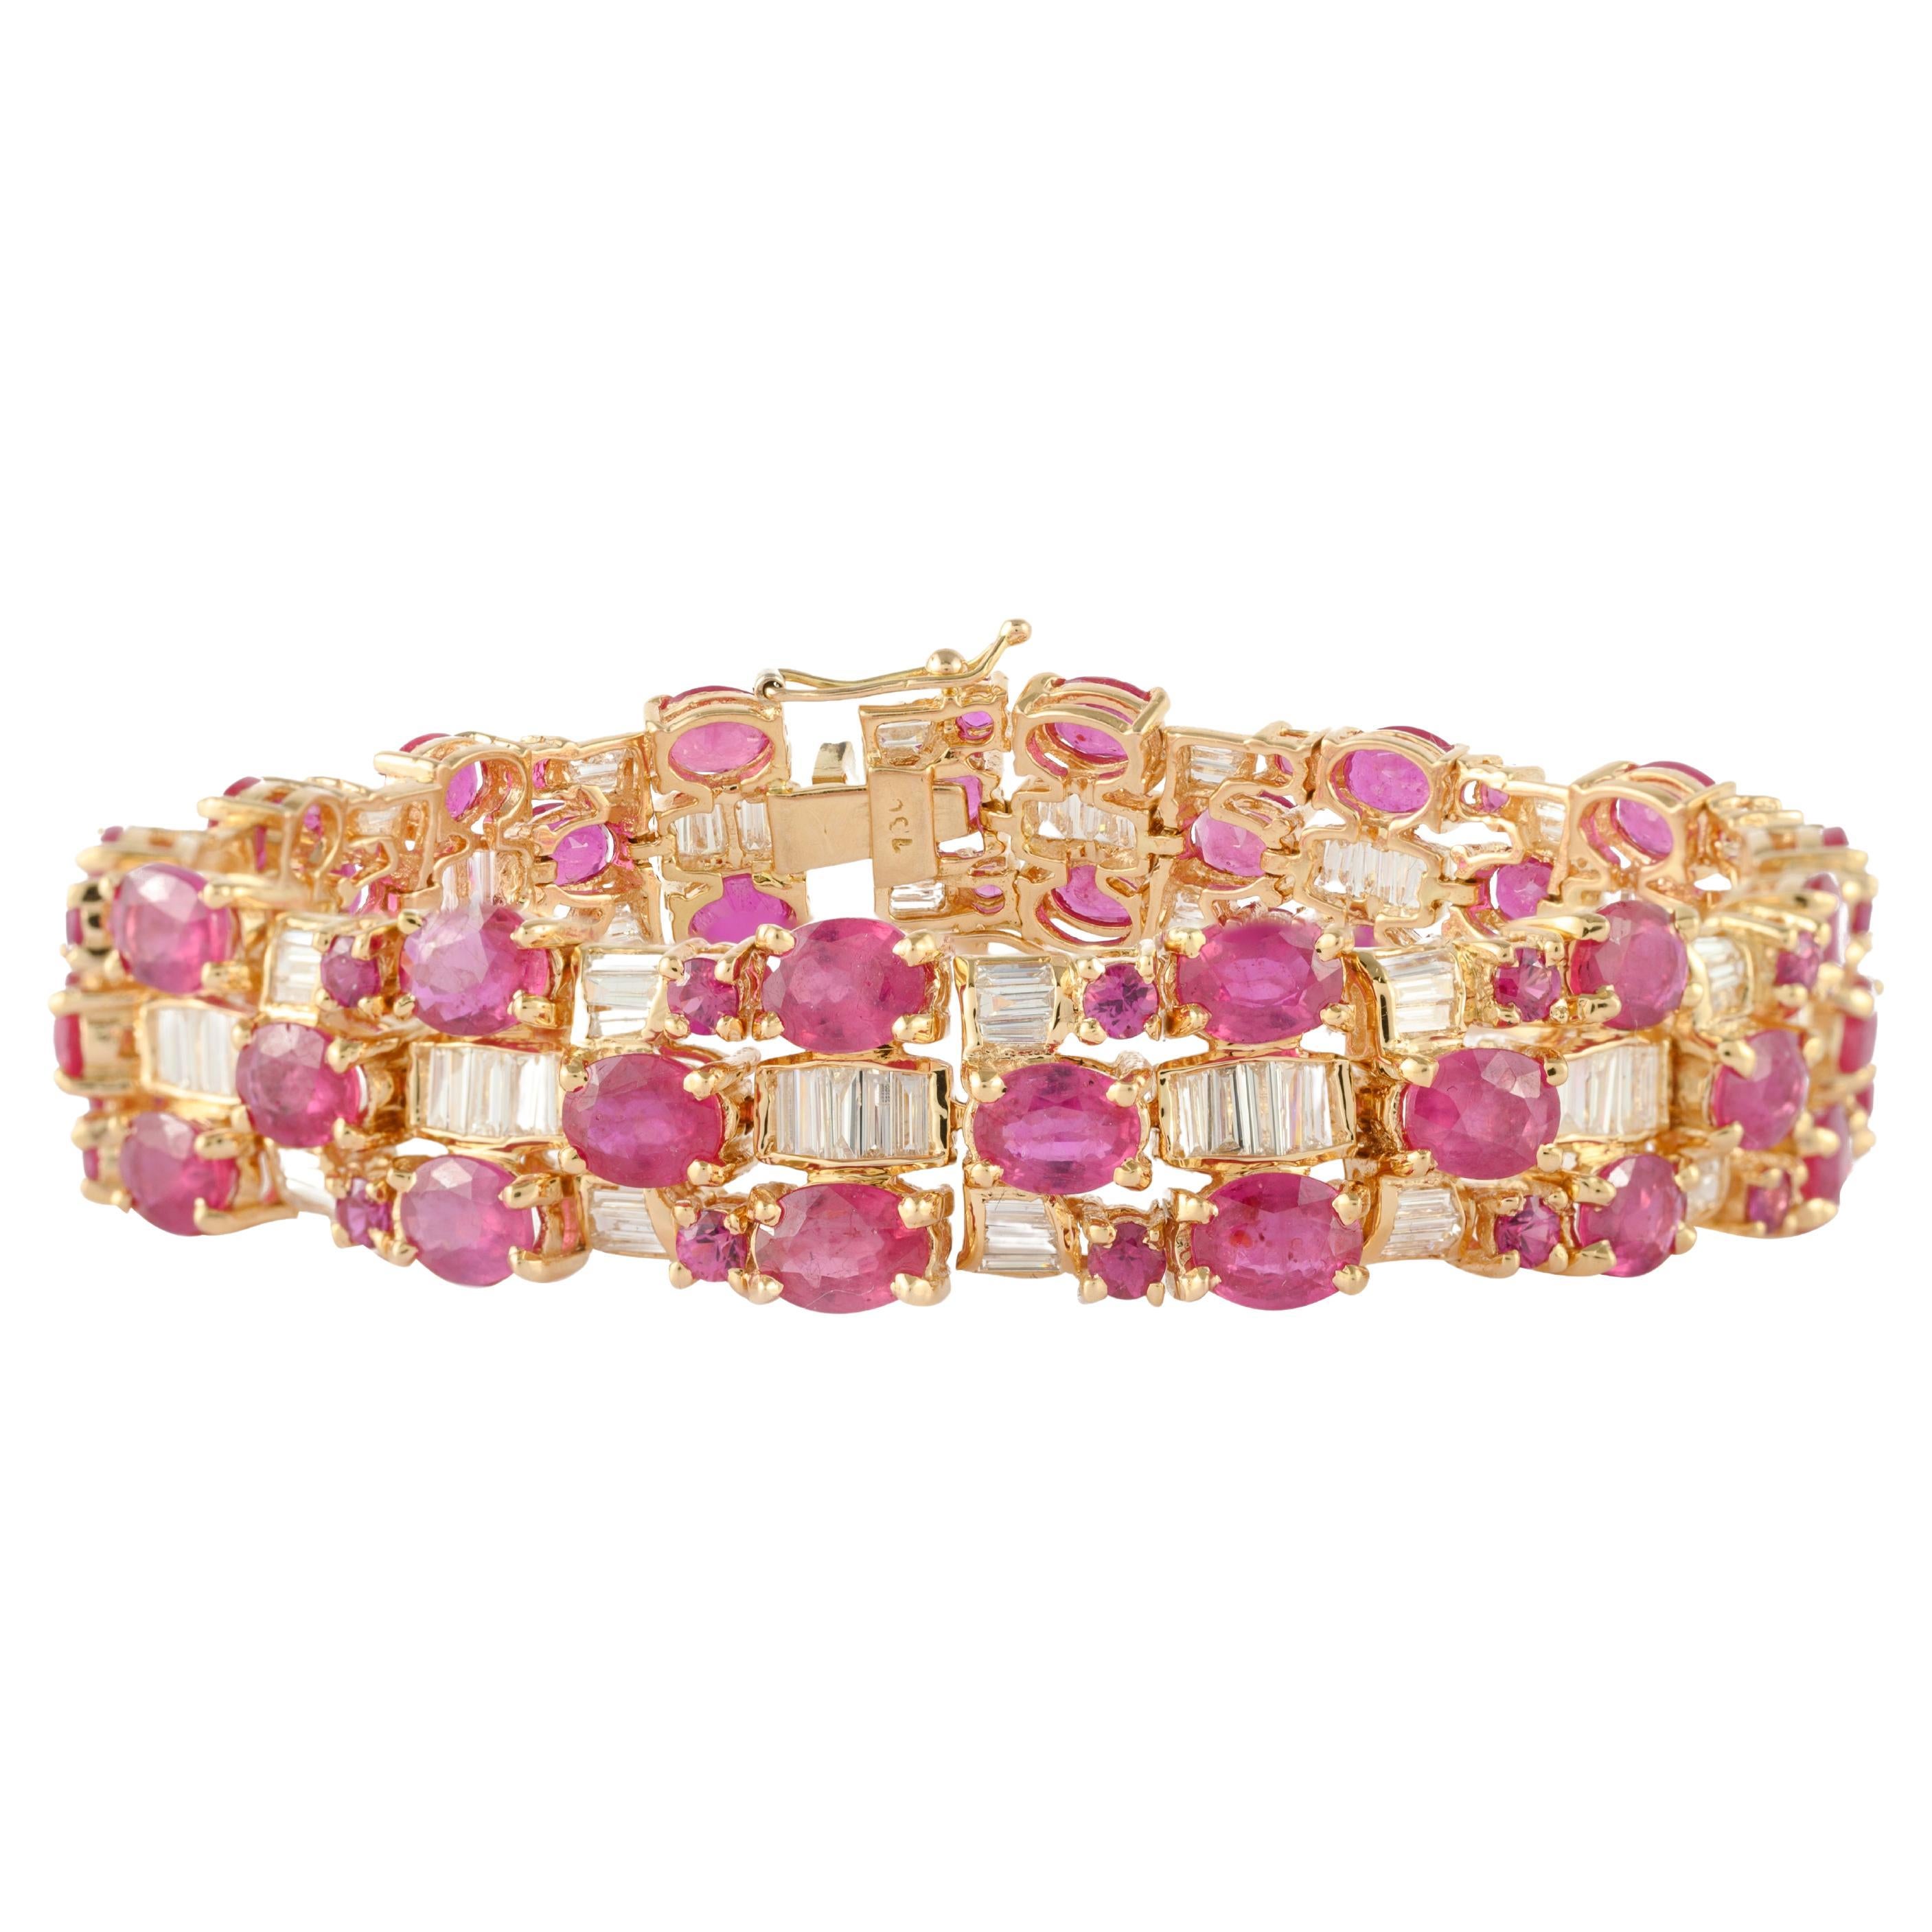 29.88 Carat Natural Ruby Art Deco Diamond Bracelet in 18k Solid Yellow Gold